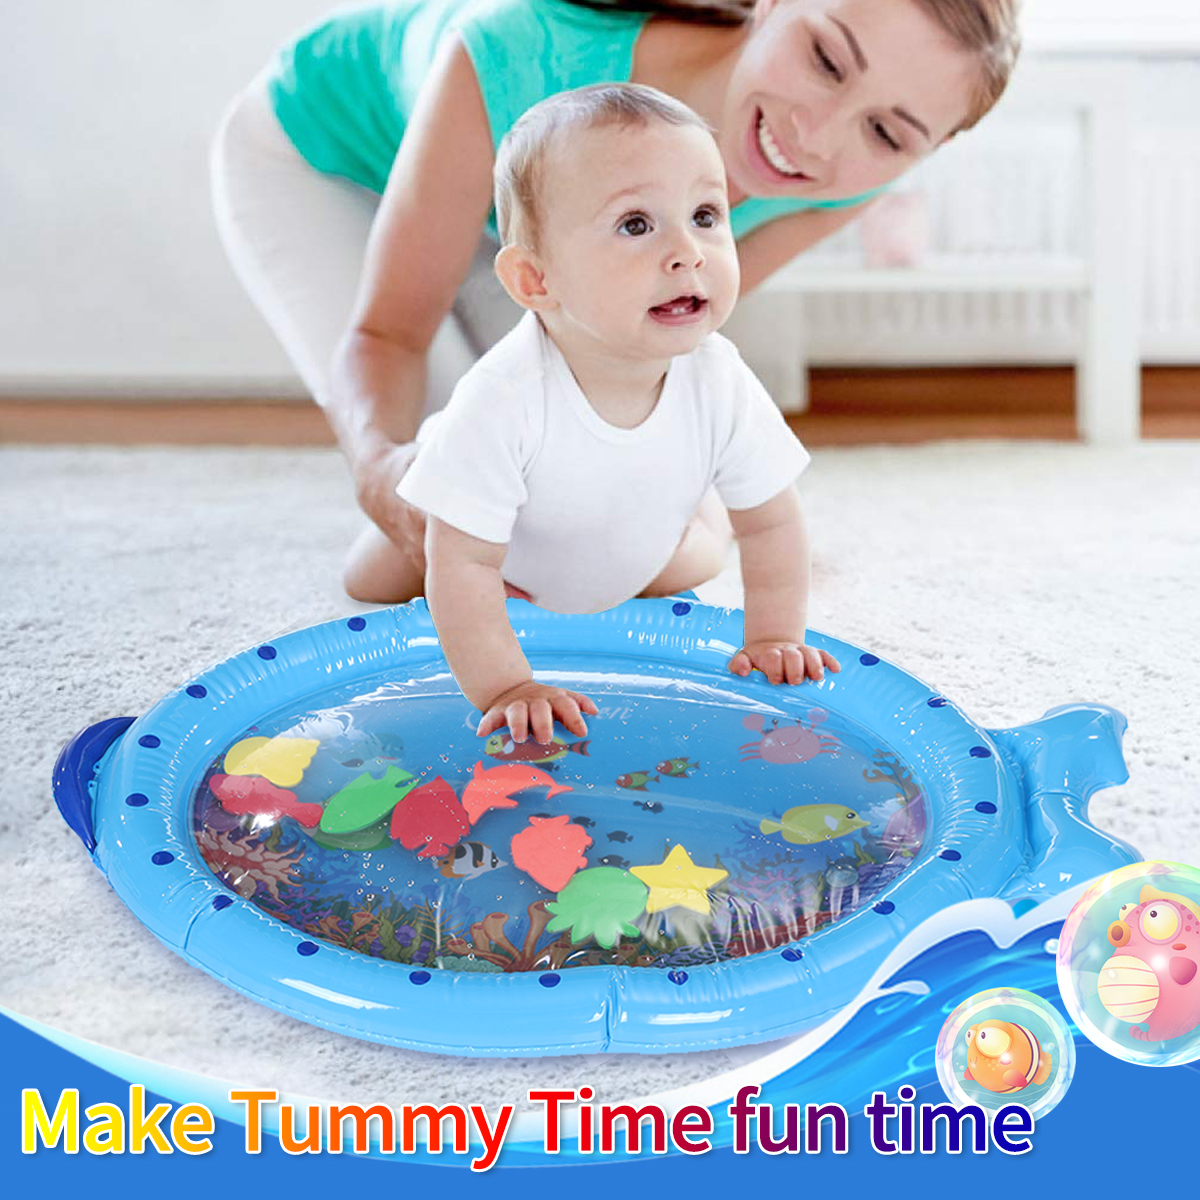 Blue-Sprinkler-Play-Mat-With-Cartoon-Submarine-Pattern-For-Kids-Filling-Fun-Water-Cushion-Baby-Toys--1895673-2